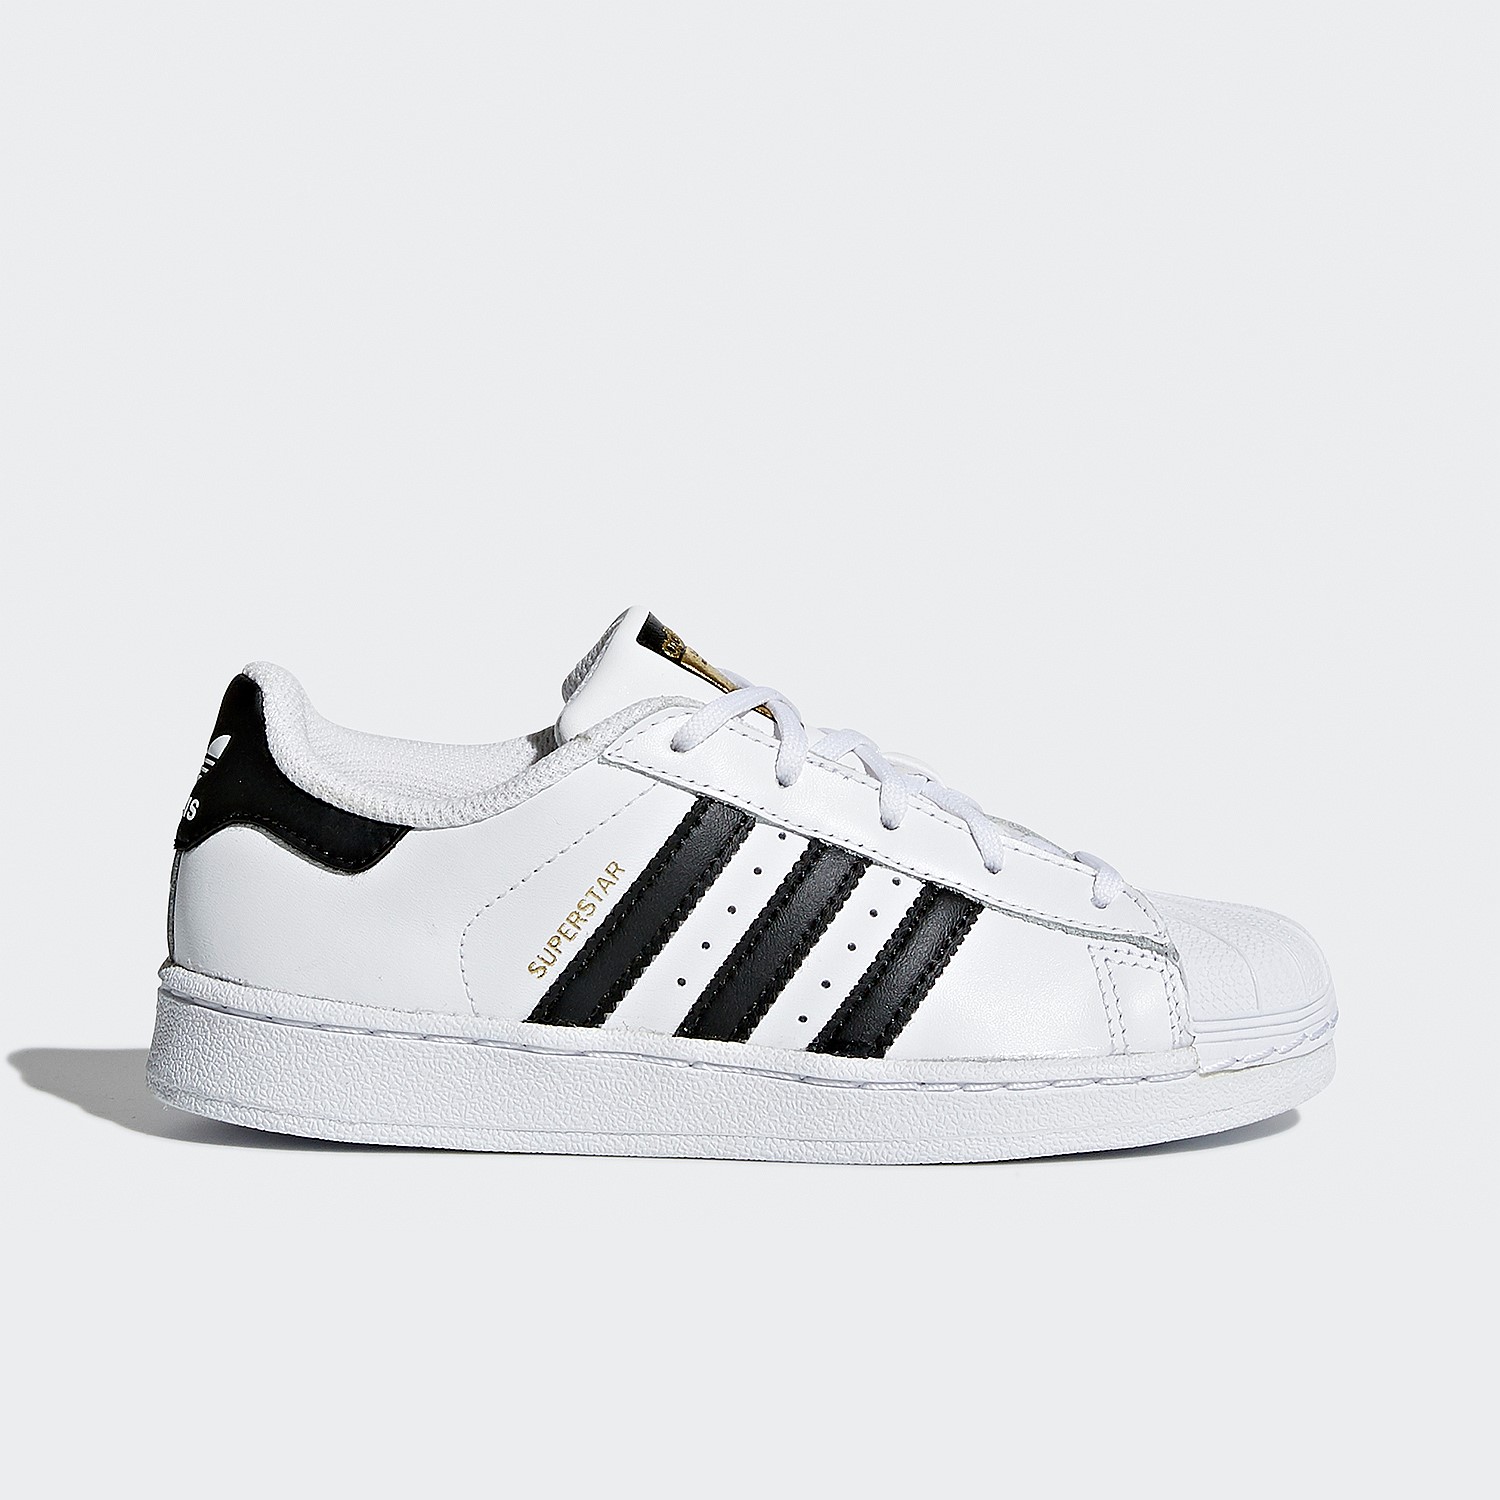 adidas superstar shoes nz, OFF 73%,Buy!